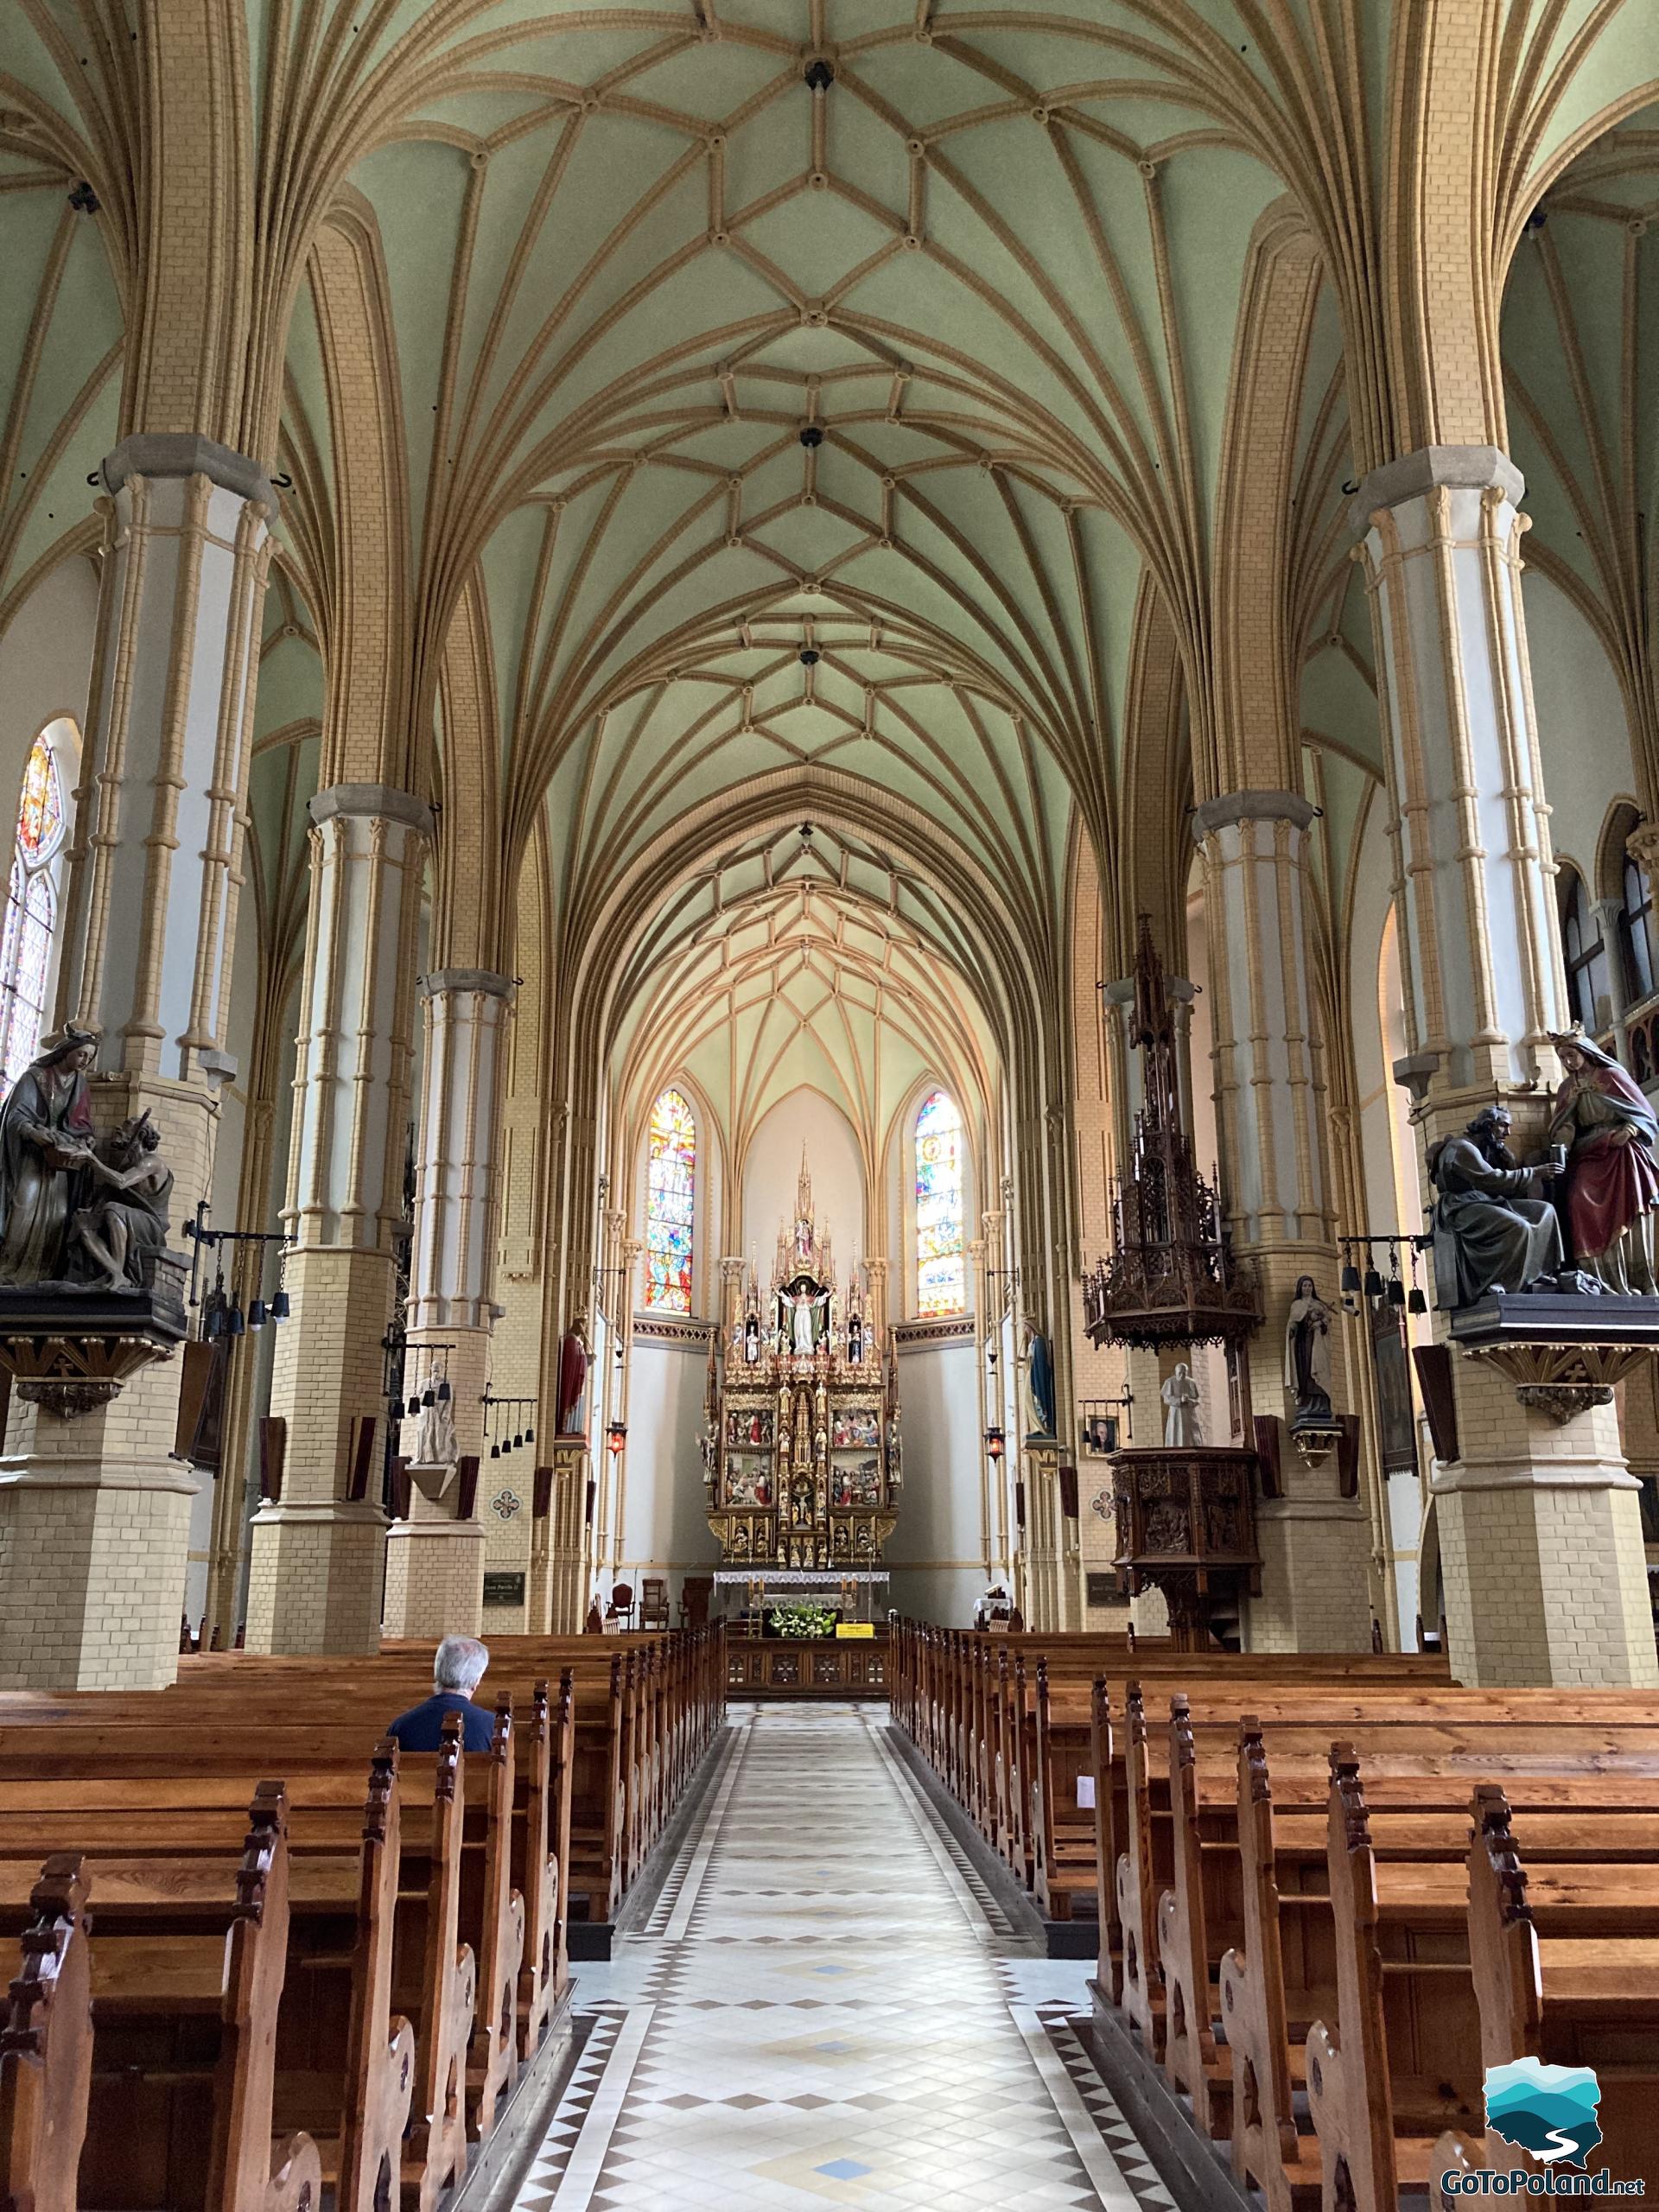 the interior of the church with rows of pews and the main altar in the background